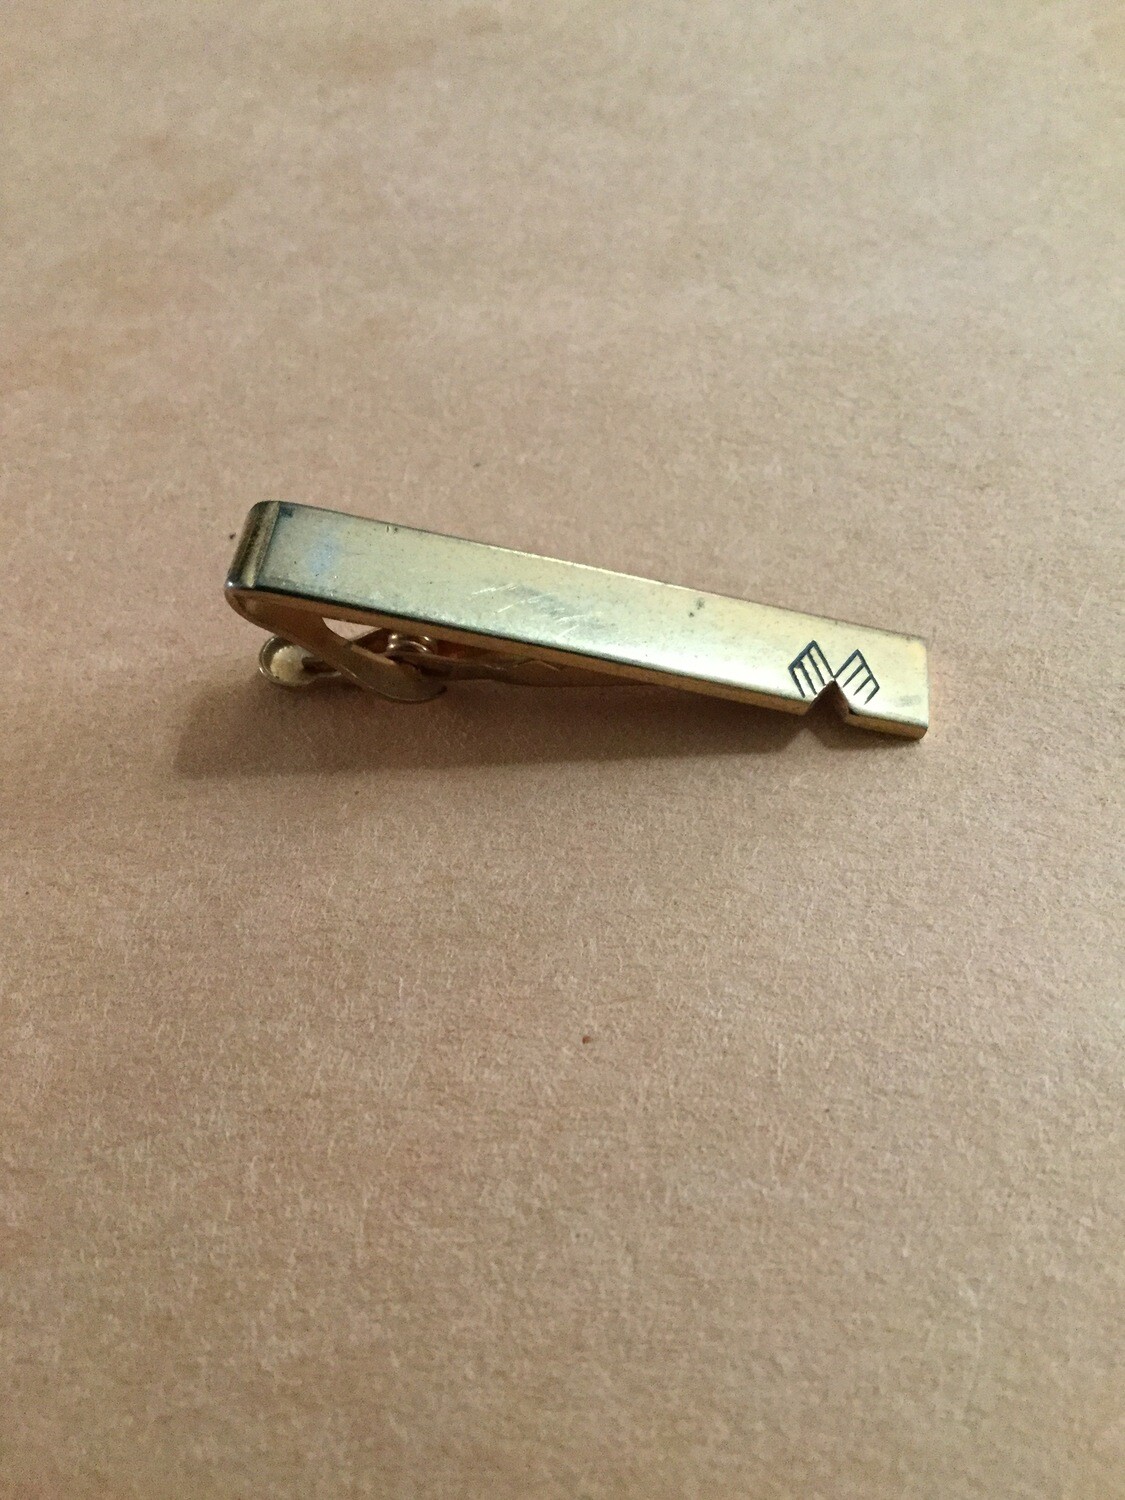 Tie Clip 2 of 4, Anointing of Victory over all battles, struggles and challenges